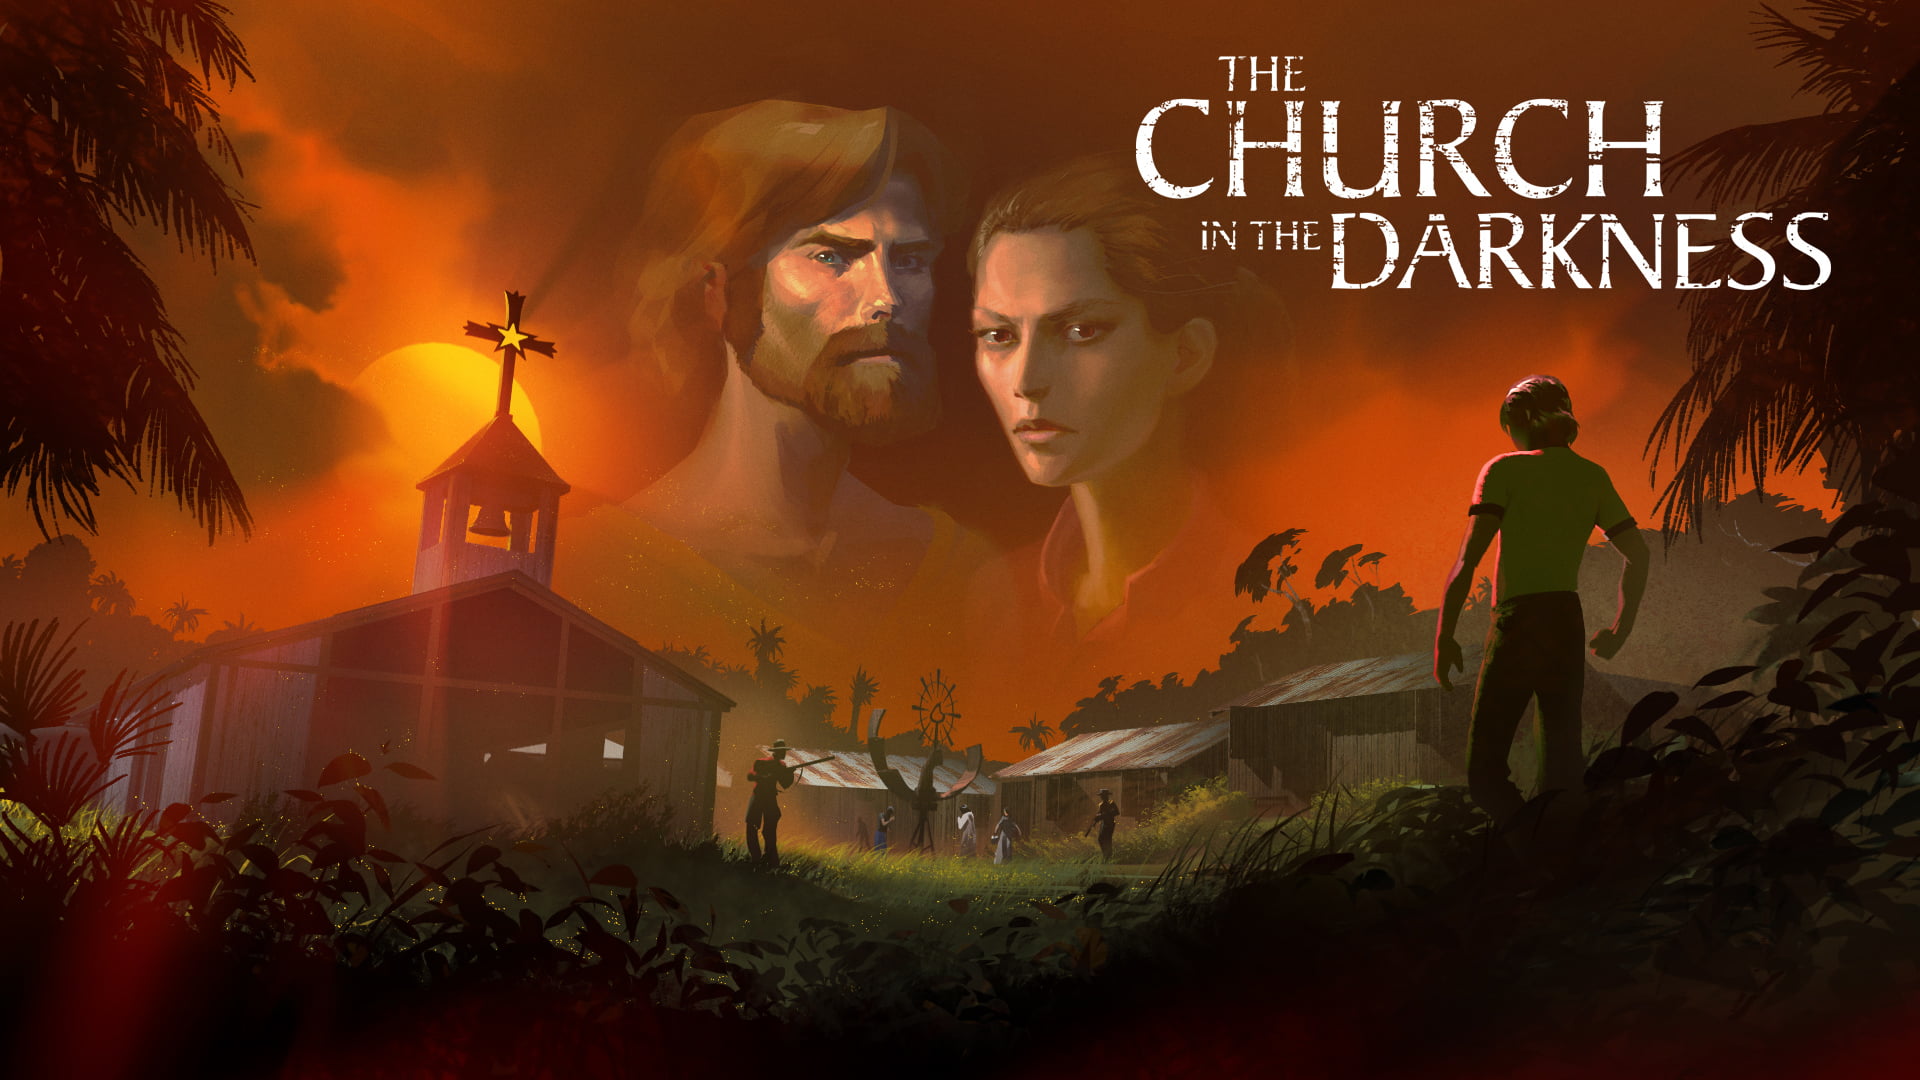 The church in the darkness - review | the church in the darkness | the church in the darkness análises